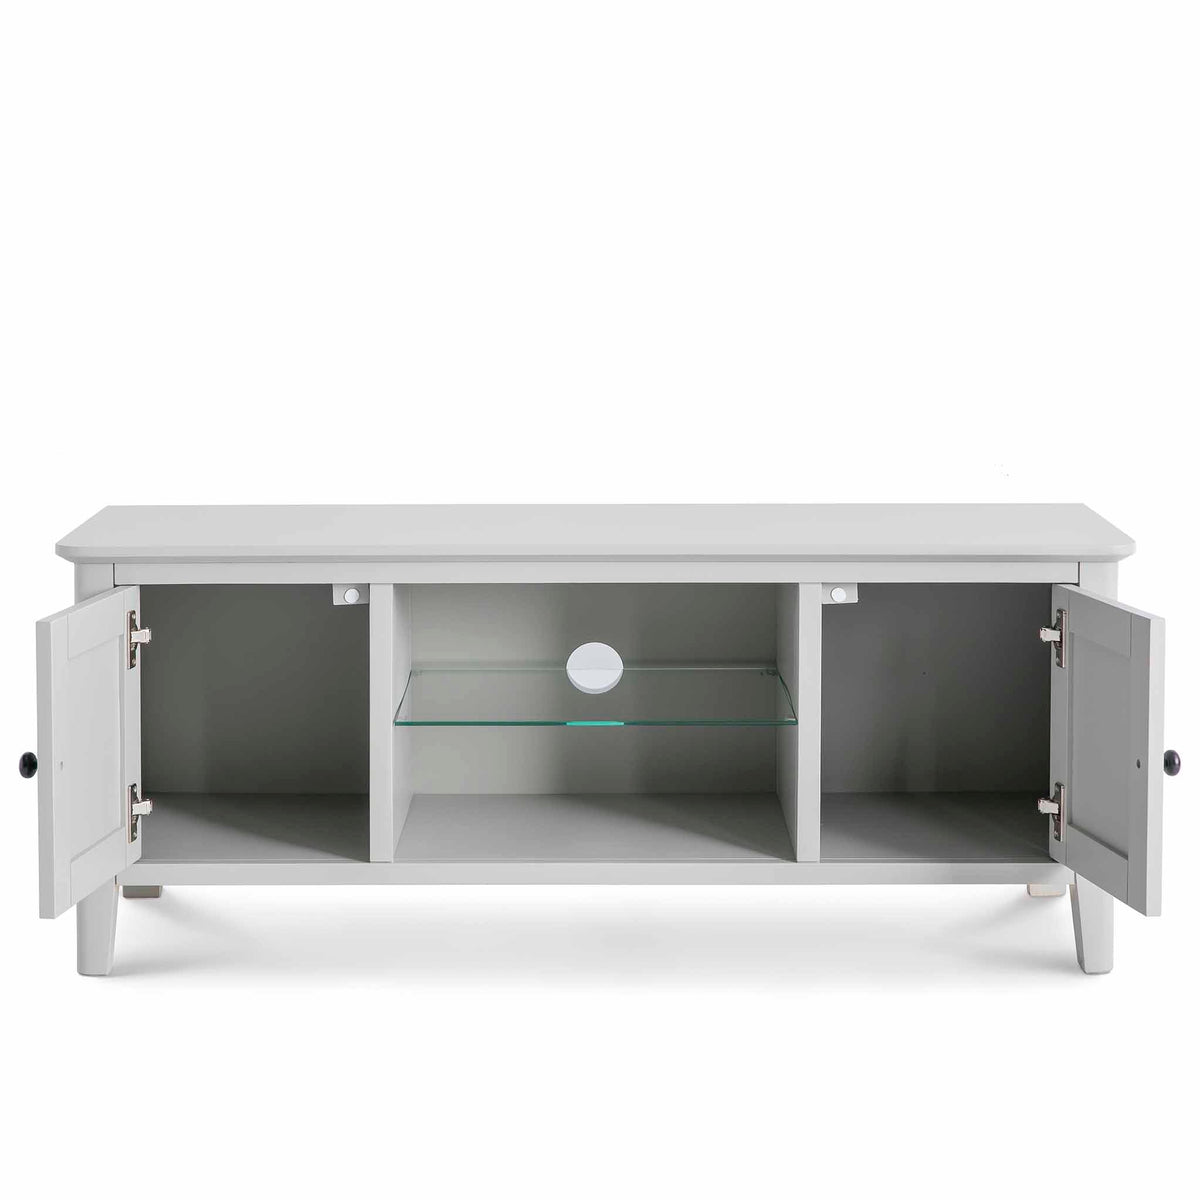 Elgin Grey 120cm large TV stand - Front view with cupboard doors open